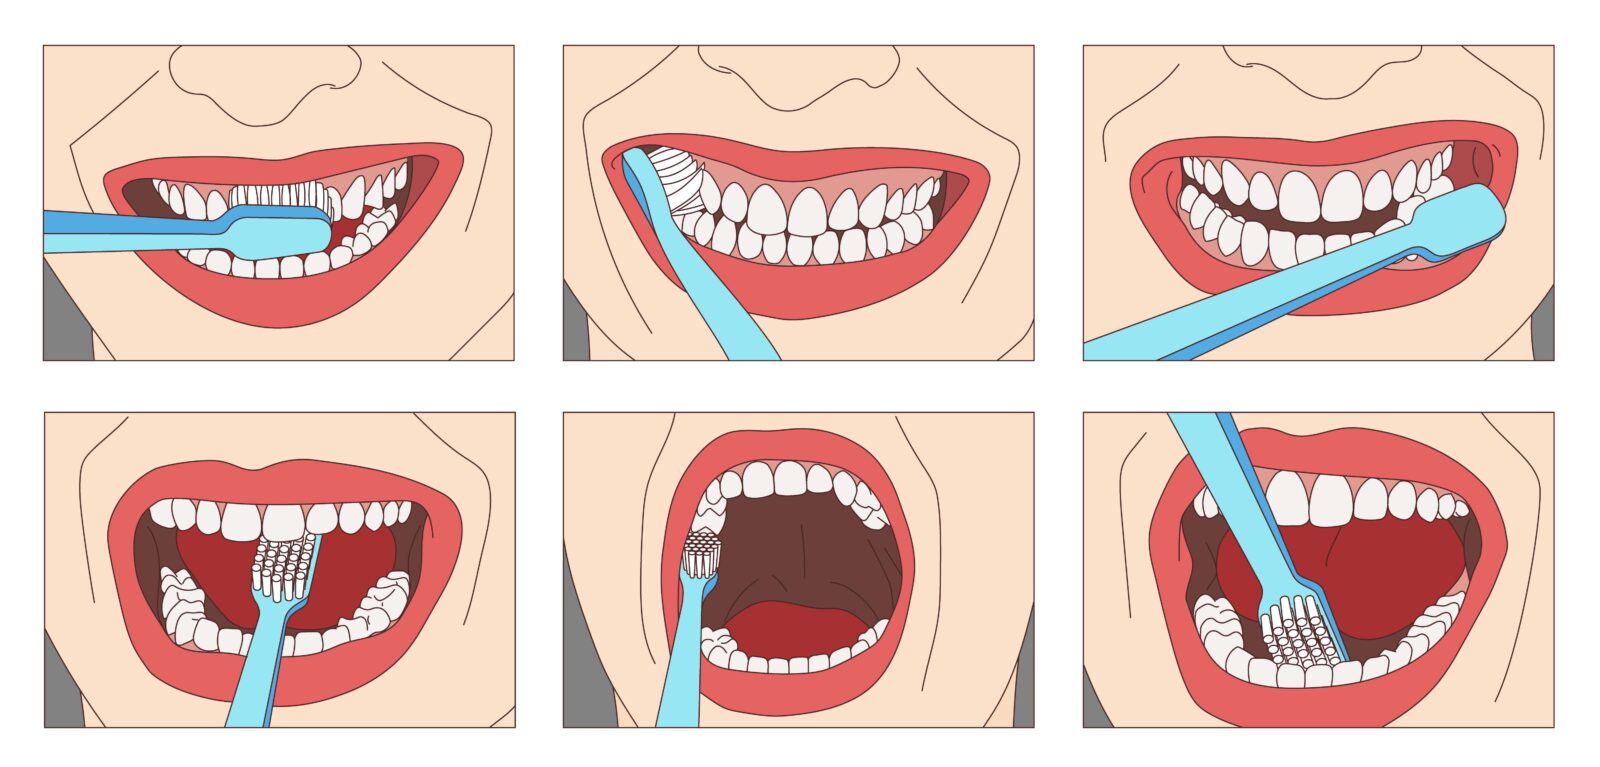 six images showing the steps on how to properly brush your teeth